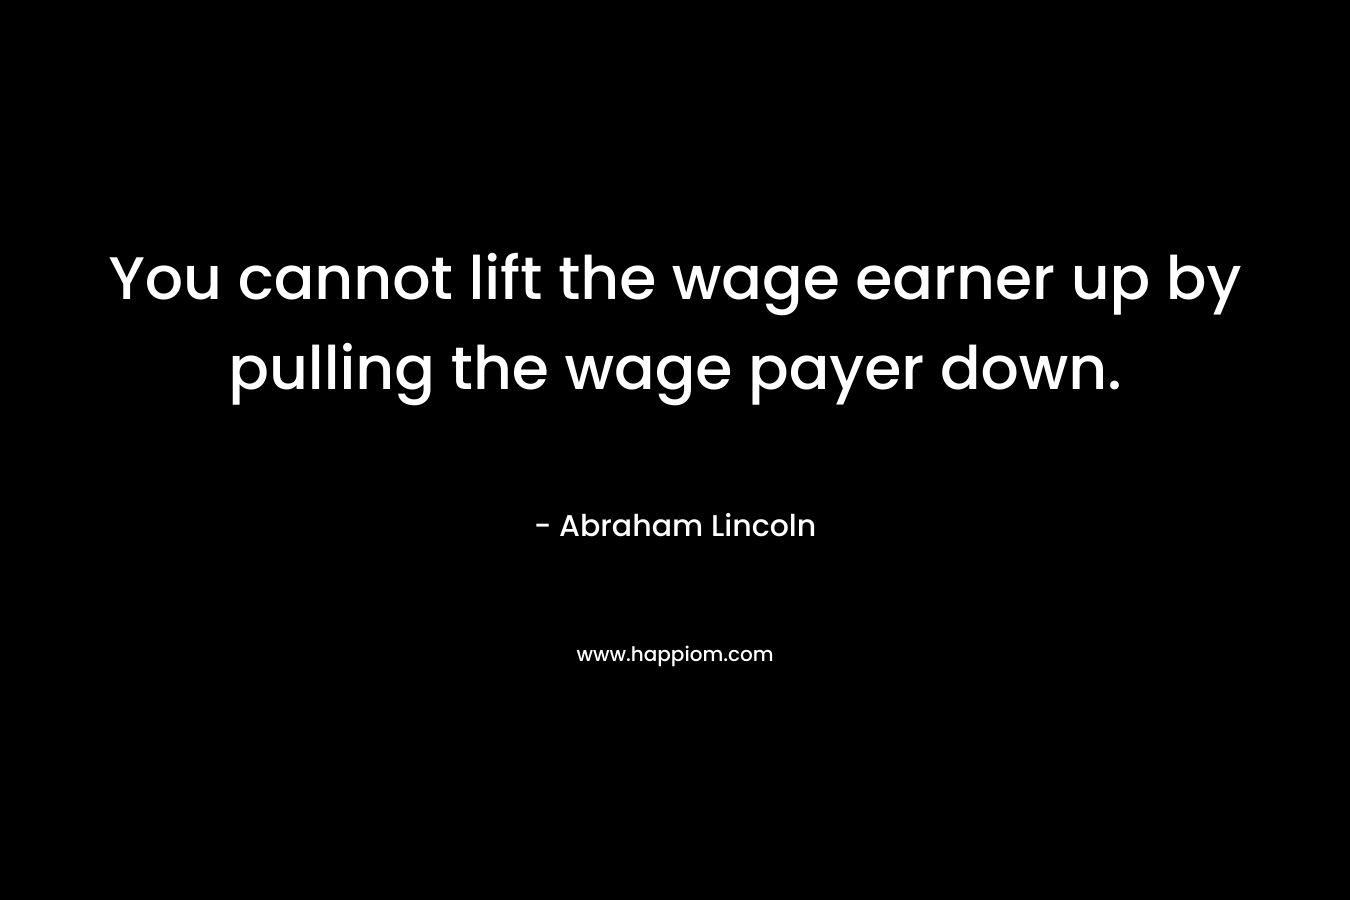 You cannot lift the wage earner up by pulling the wage payer down. – Abraham Lincoln